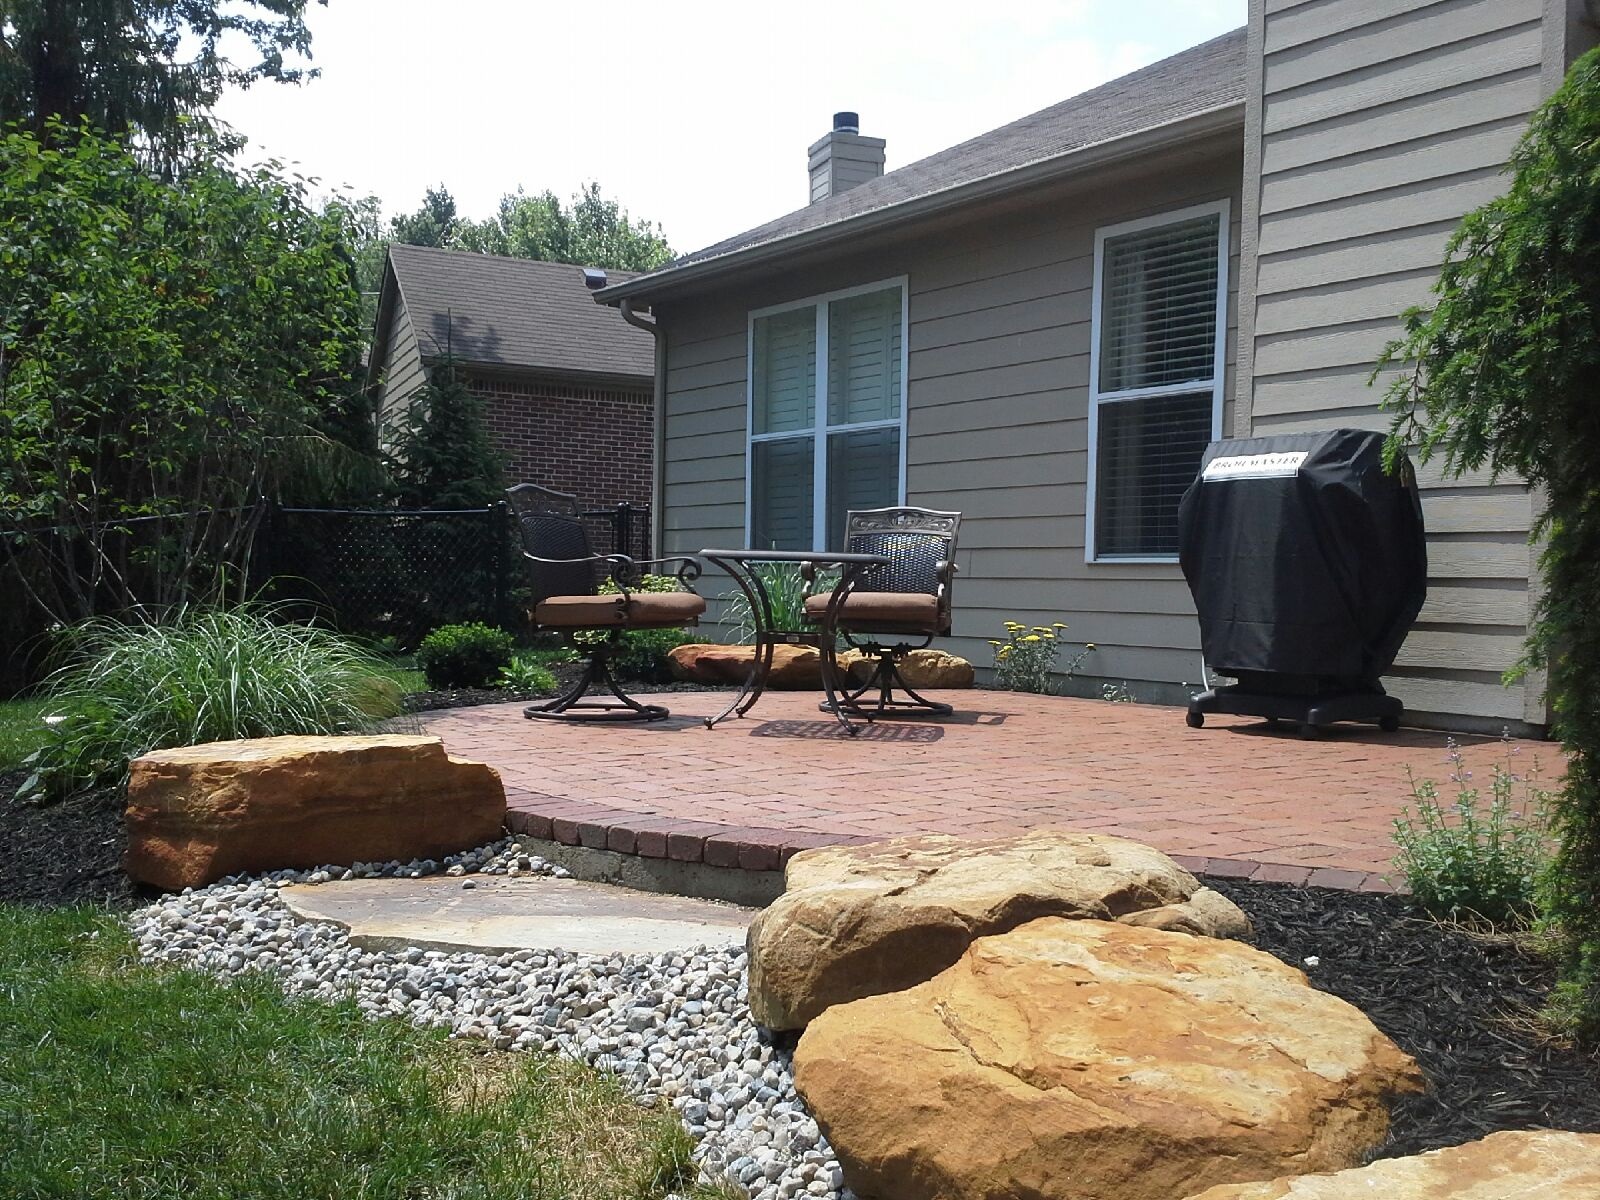 Clay pavers are a preferred material because of their rich texture and color and it marries well with the natural boulder clusters that define the beds and helps to transition the grade. (Submitted photo)